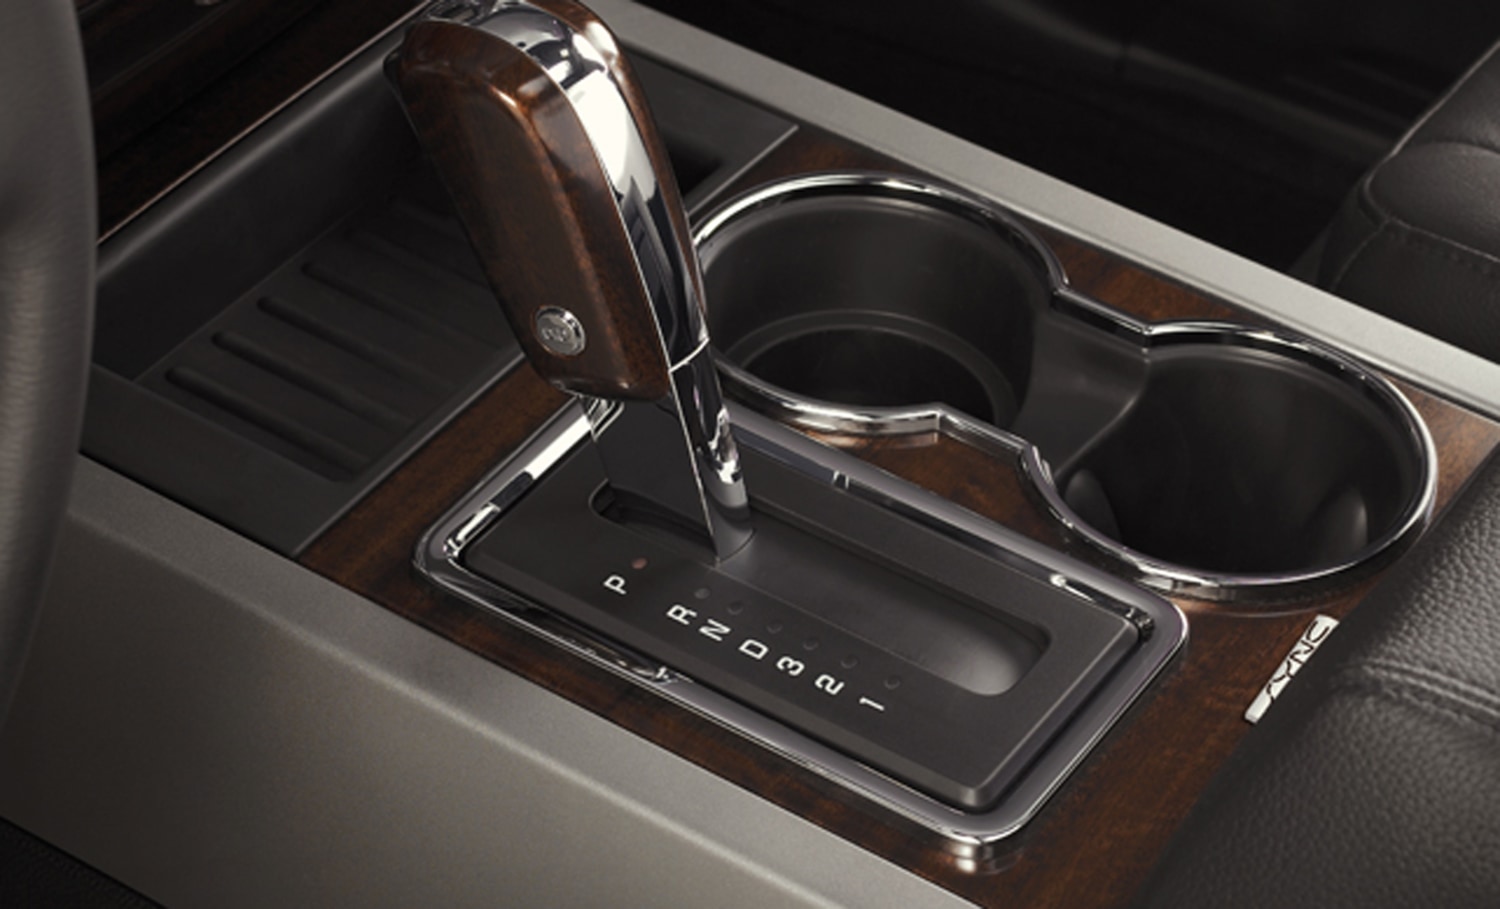 Which family cars have the best cup holders? 